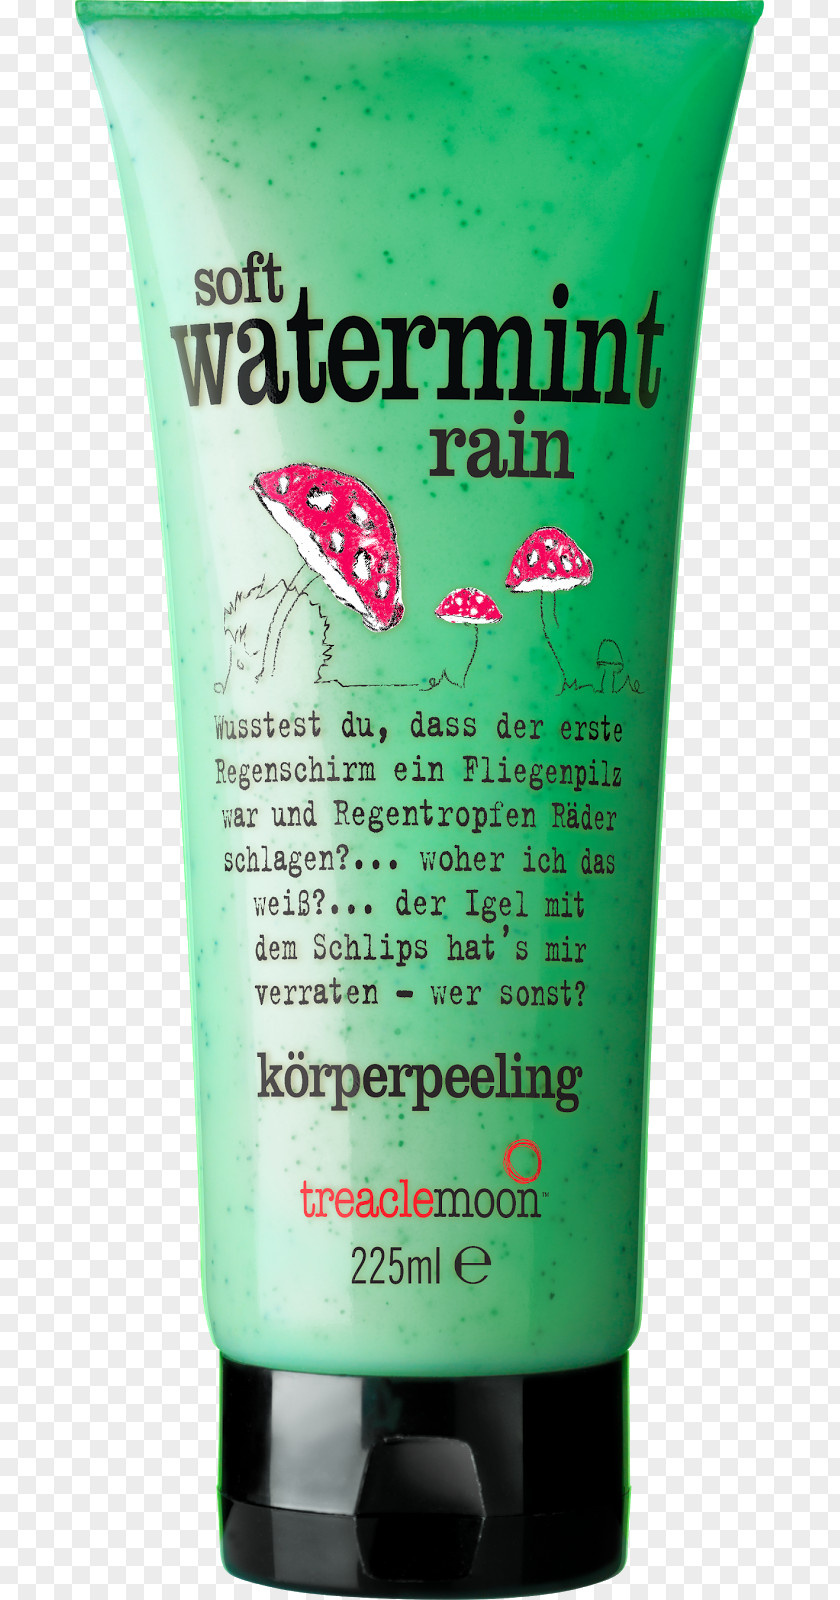 Treacle Cream Exfoliation Lotion Shower Gel Water Mint PNG